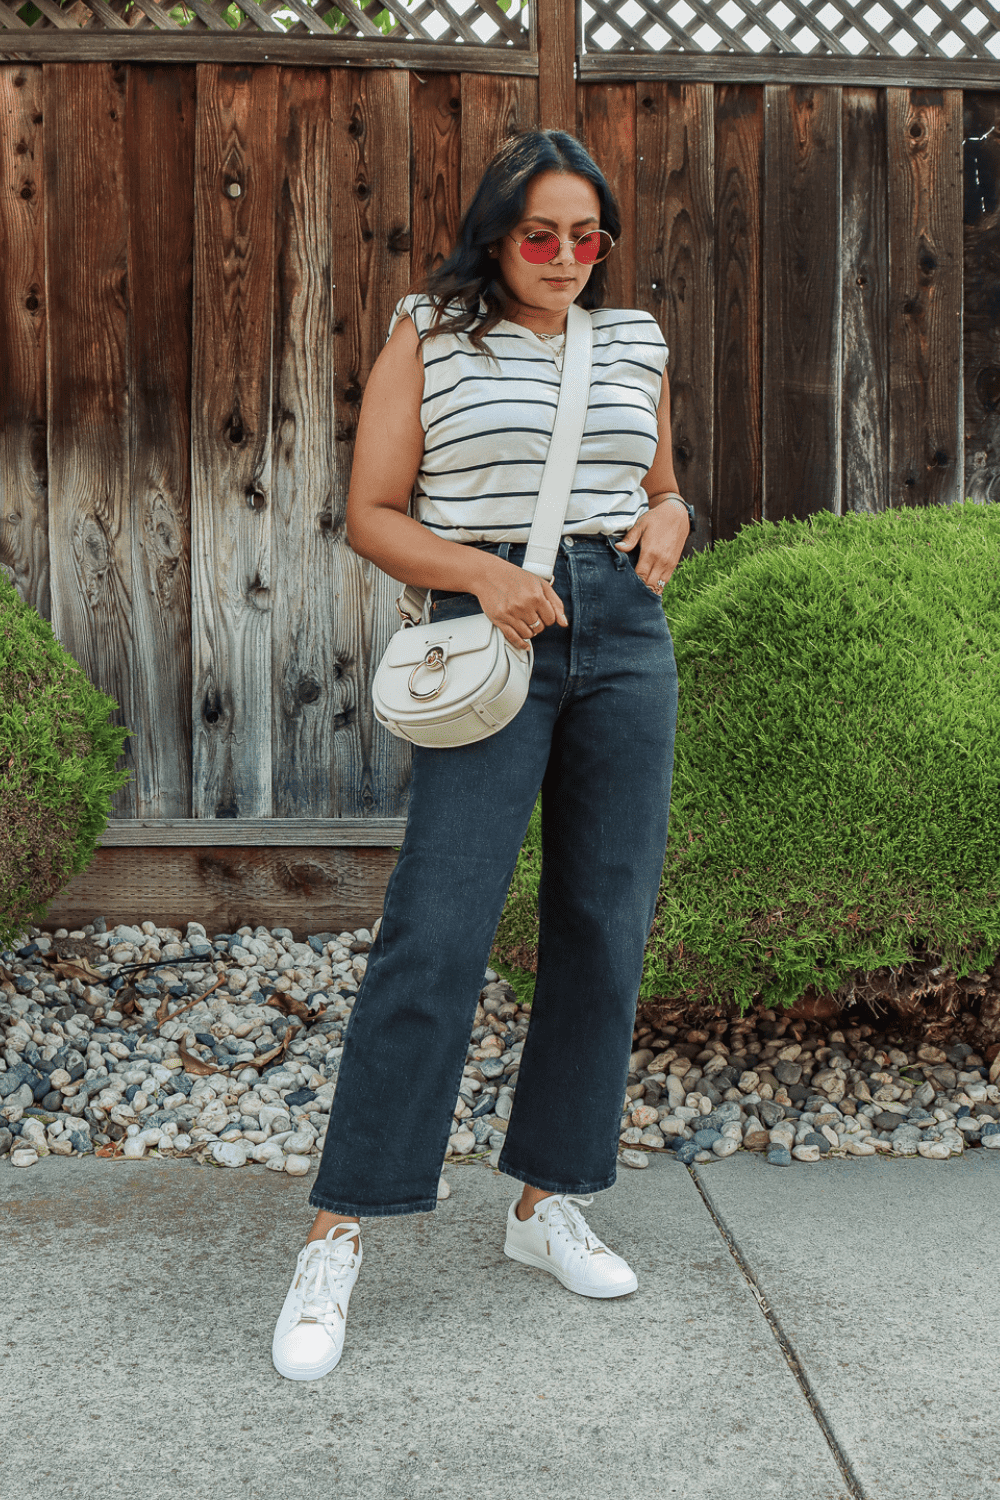 How to Wear Black Jeans & Look Good in Summer